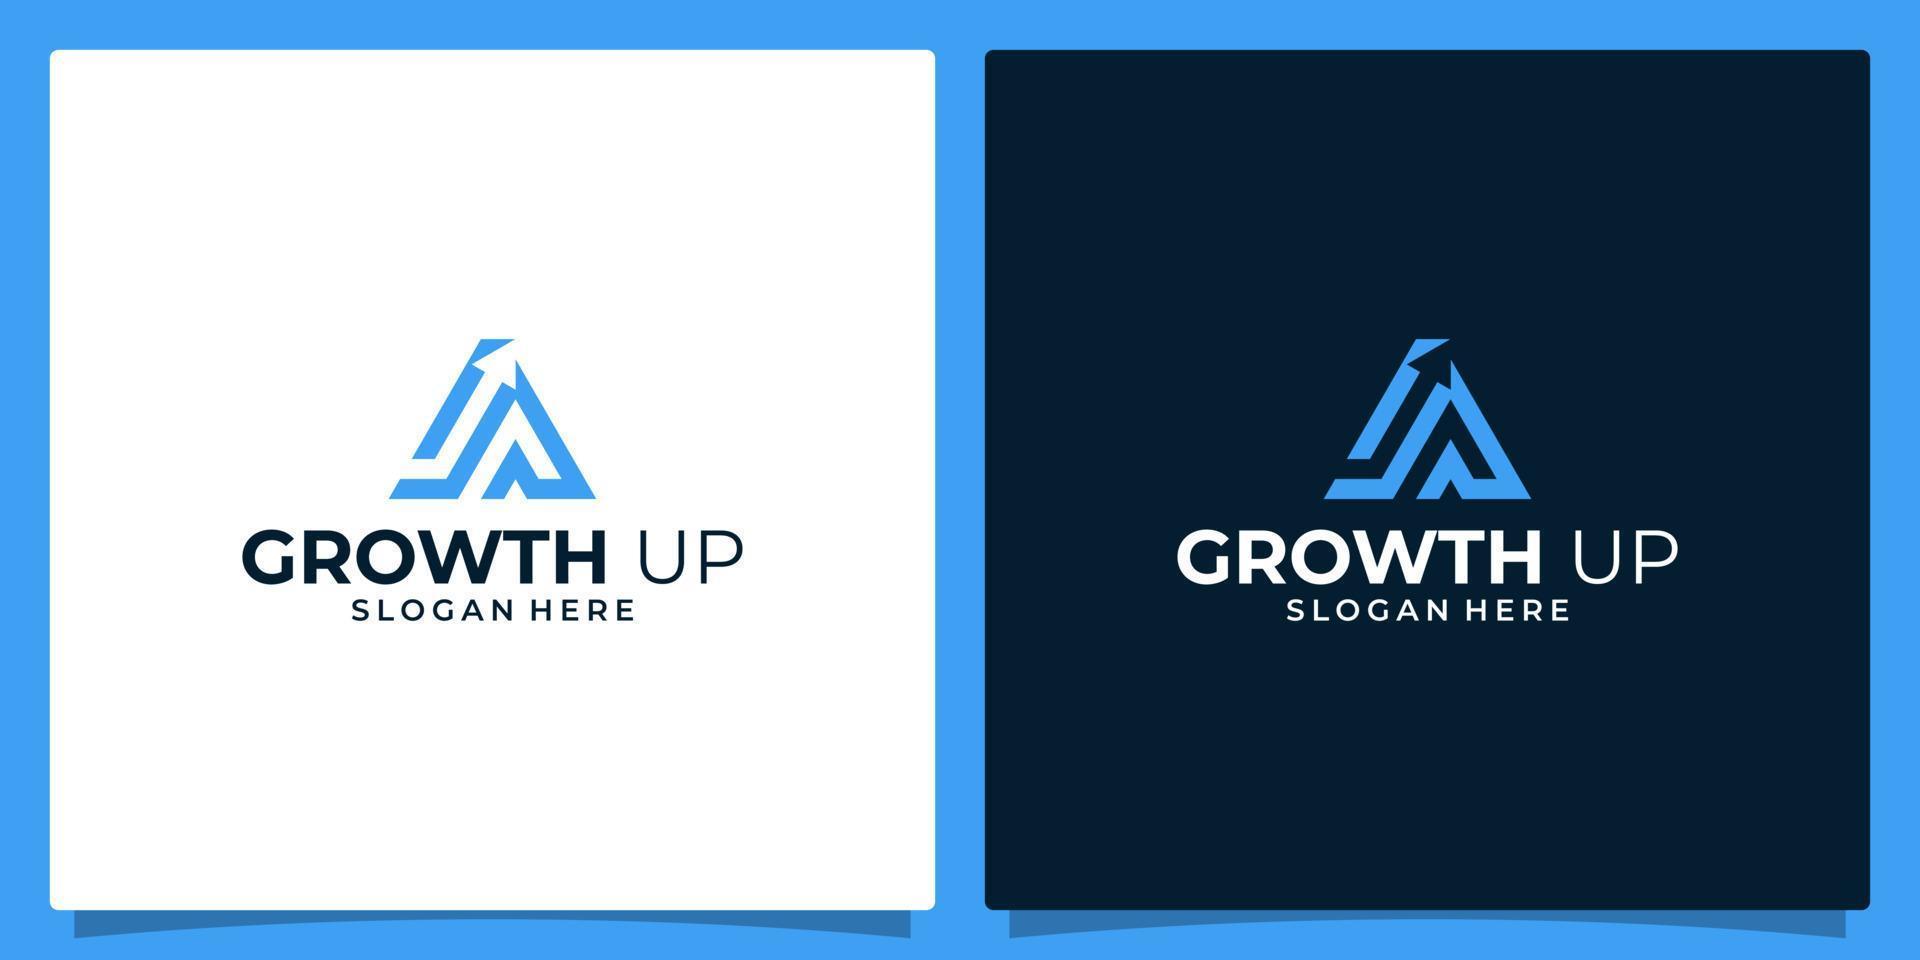 Growth arrow logo icon design and initial letter A logo abstract vector illustration graphic design. Flat Vector Logo Design Template Element